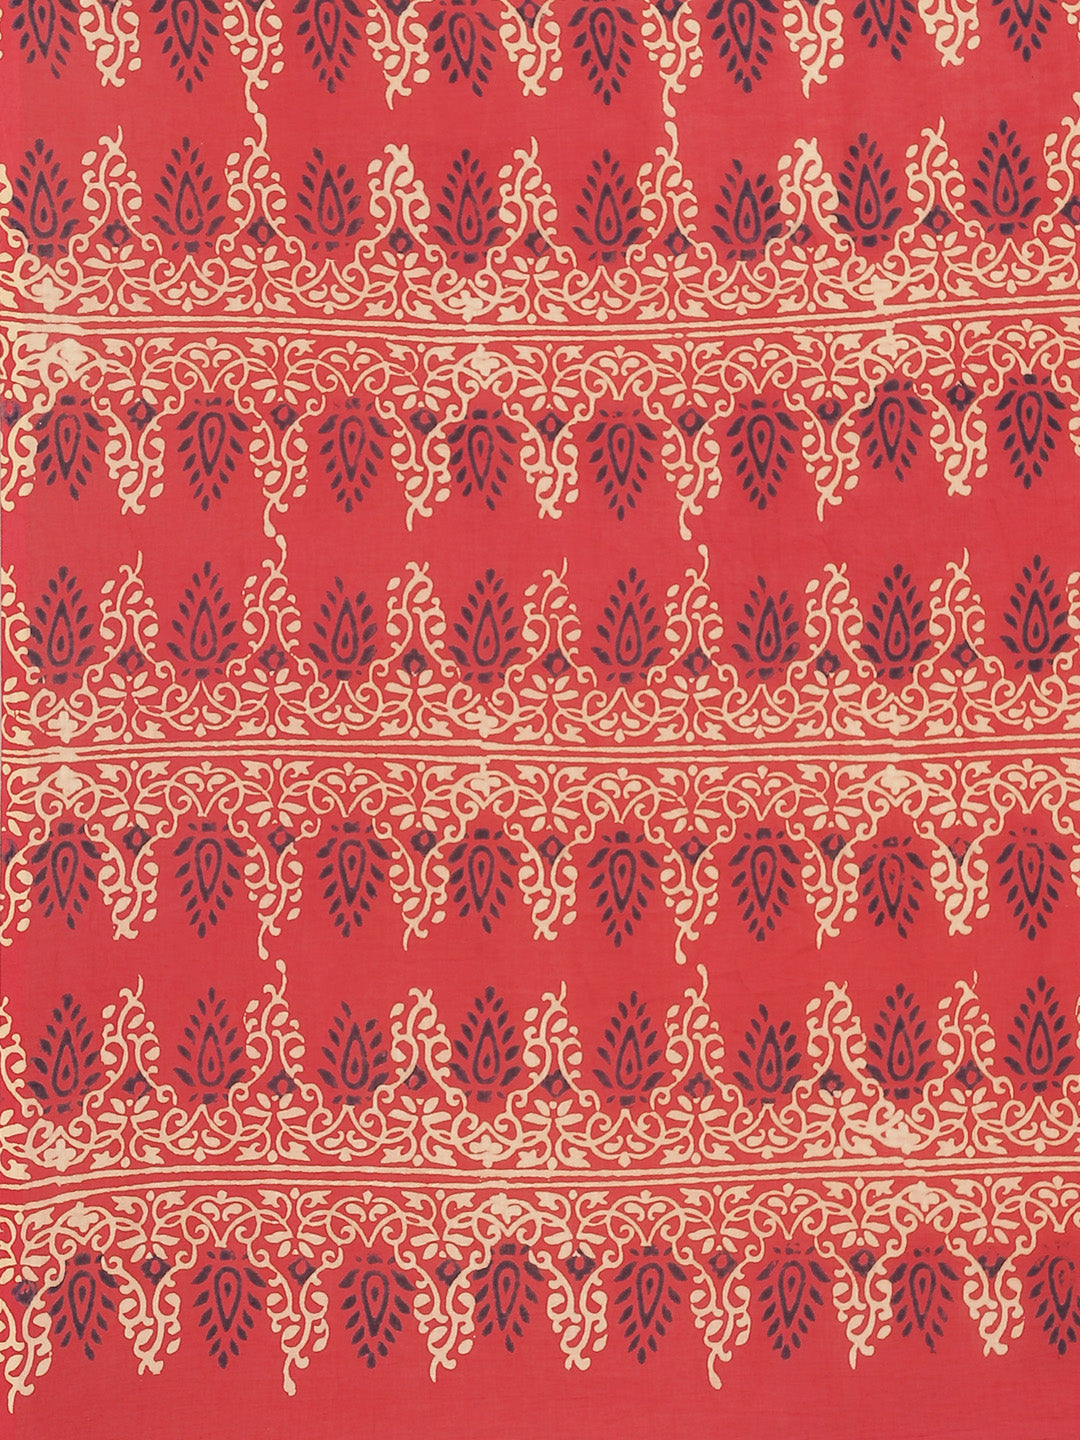 Red and Black, Kalakari India Pure Cotton Handblock Printed Saree and Blouse RCBGSA0021-Saree-Kalakari India-RCBGSA0021-Cotton, Geographical Indication, Hand Block, Hand Crafted, Heritage Prints, Natural Dyes, Red, Sarees, Sustainable Fabrics, Woven, Yellow-[Linen,Ethnic,wear,Fashionista,Handloom,Handicraft,Indigo,blockprint,block,print,Cotton,Chanderi,Blue, latest,classy,party,bollywood,trendy,summer,style,traditional,formal,elegant,unique,style,hand,block,print, dabu,booti,gift,present,glamoro